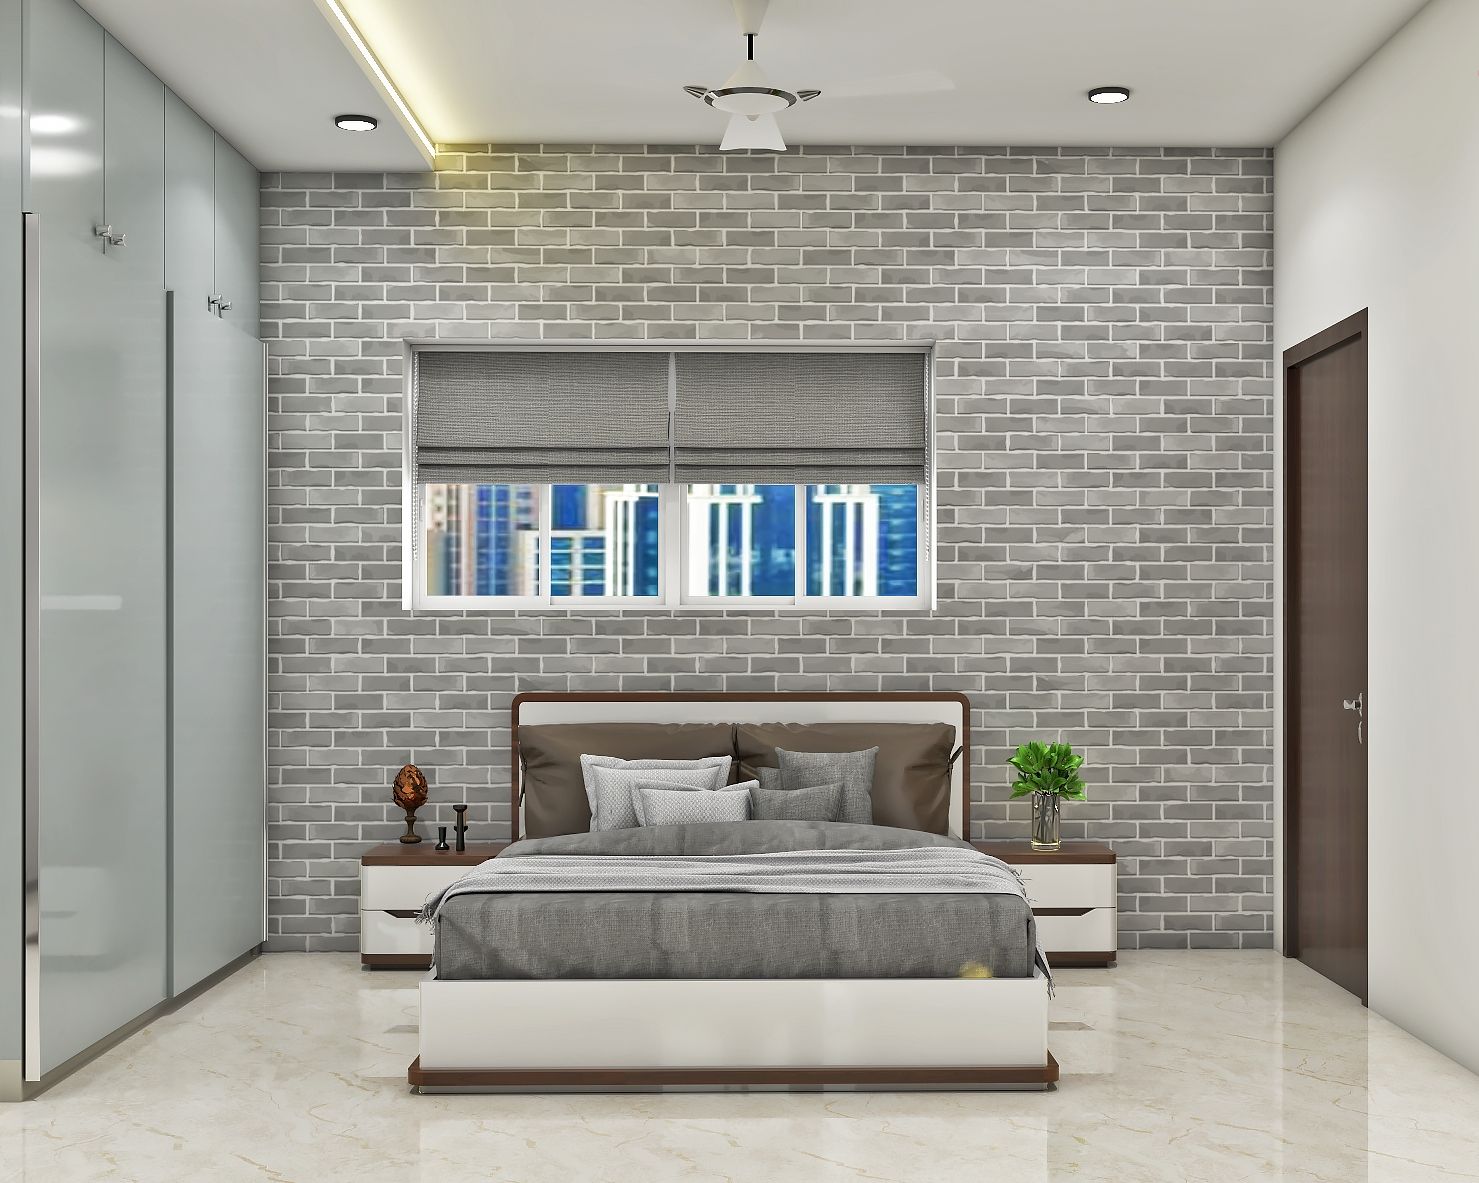 Contemporary Bedroom False Ceiling Design With Recessed Lights